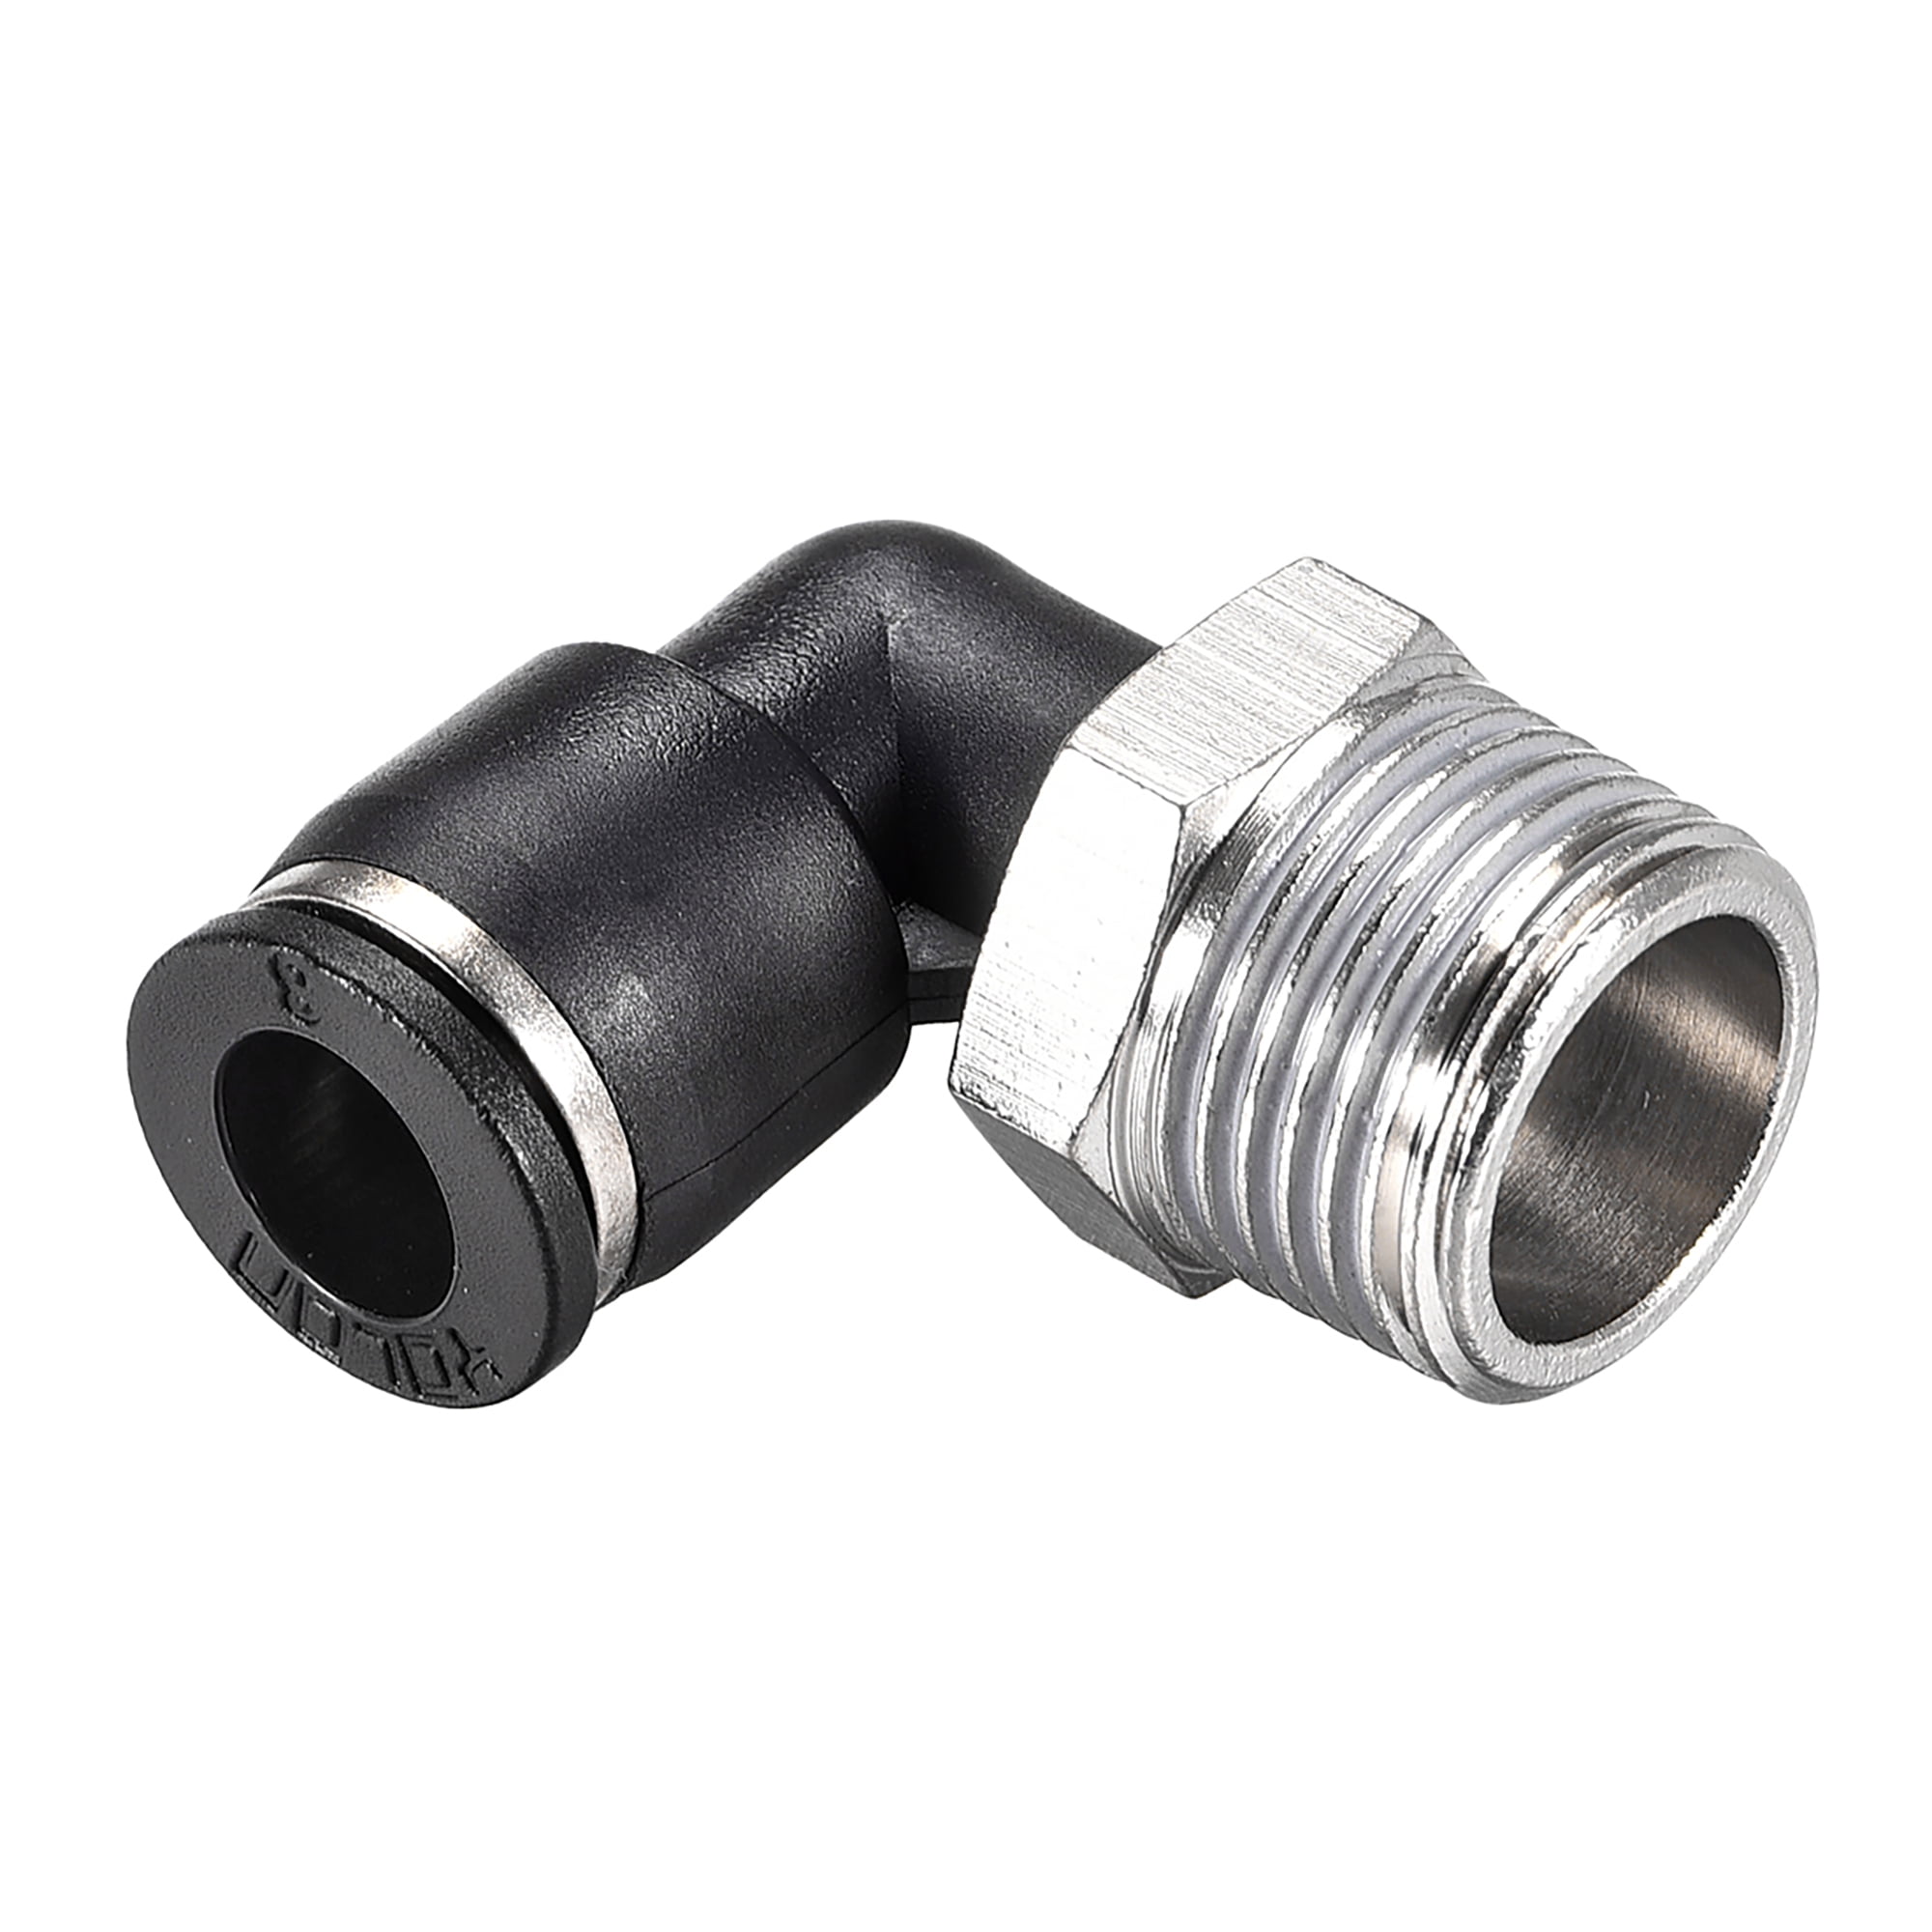 1pc MINI Push in to Connect Elbow Fitting 3 mm OD x M6 Compact Male MTL3-M6C 